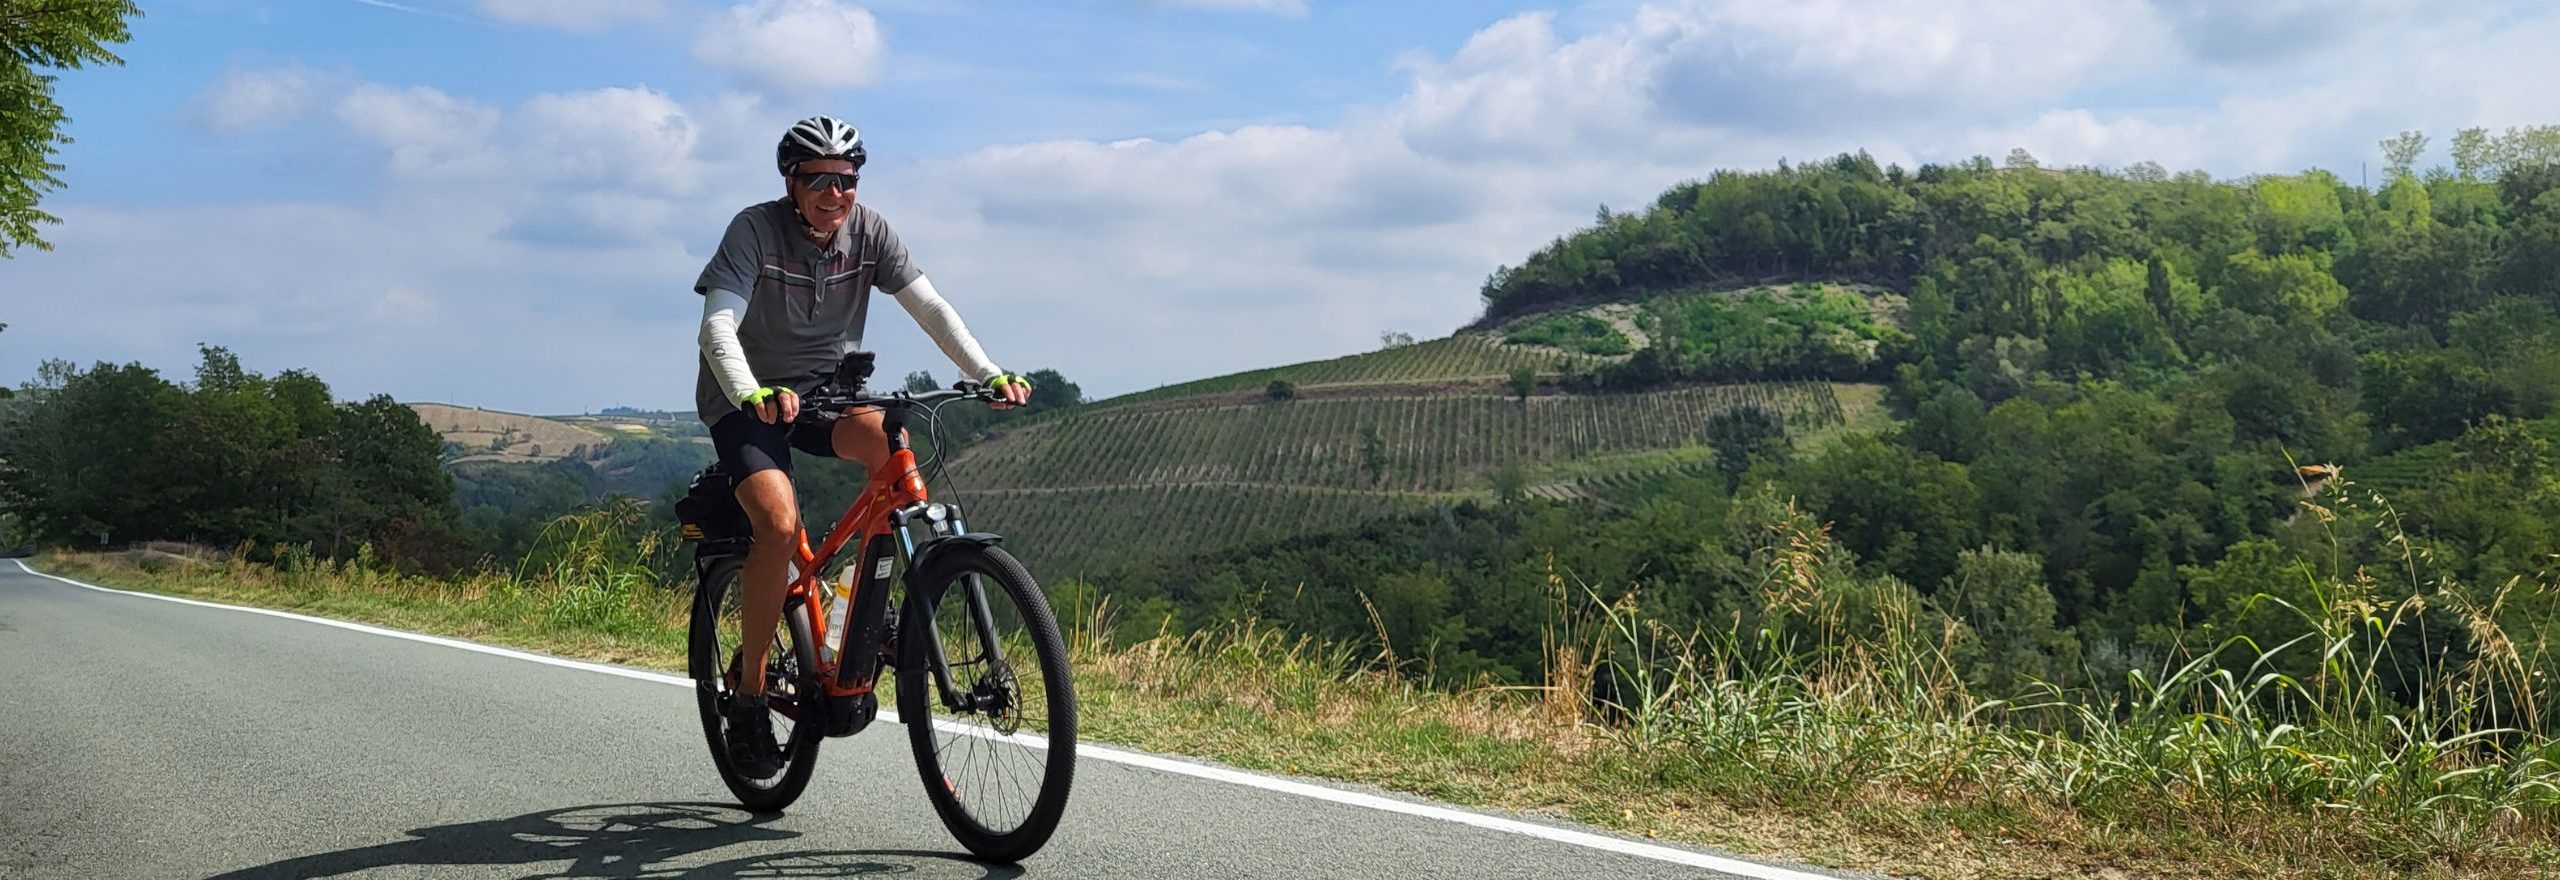 Pedaling the wine hills of Piedmont on this guided bike tour.